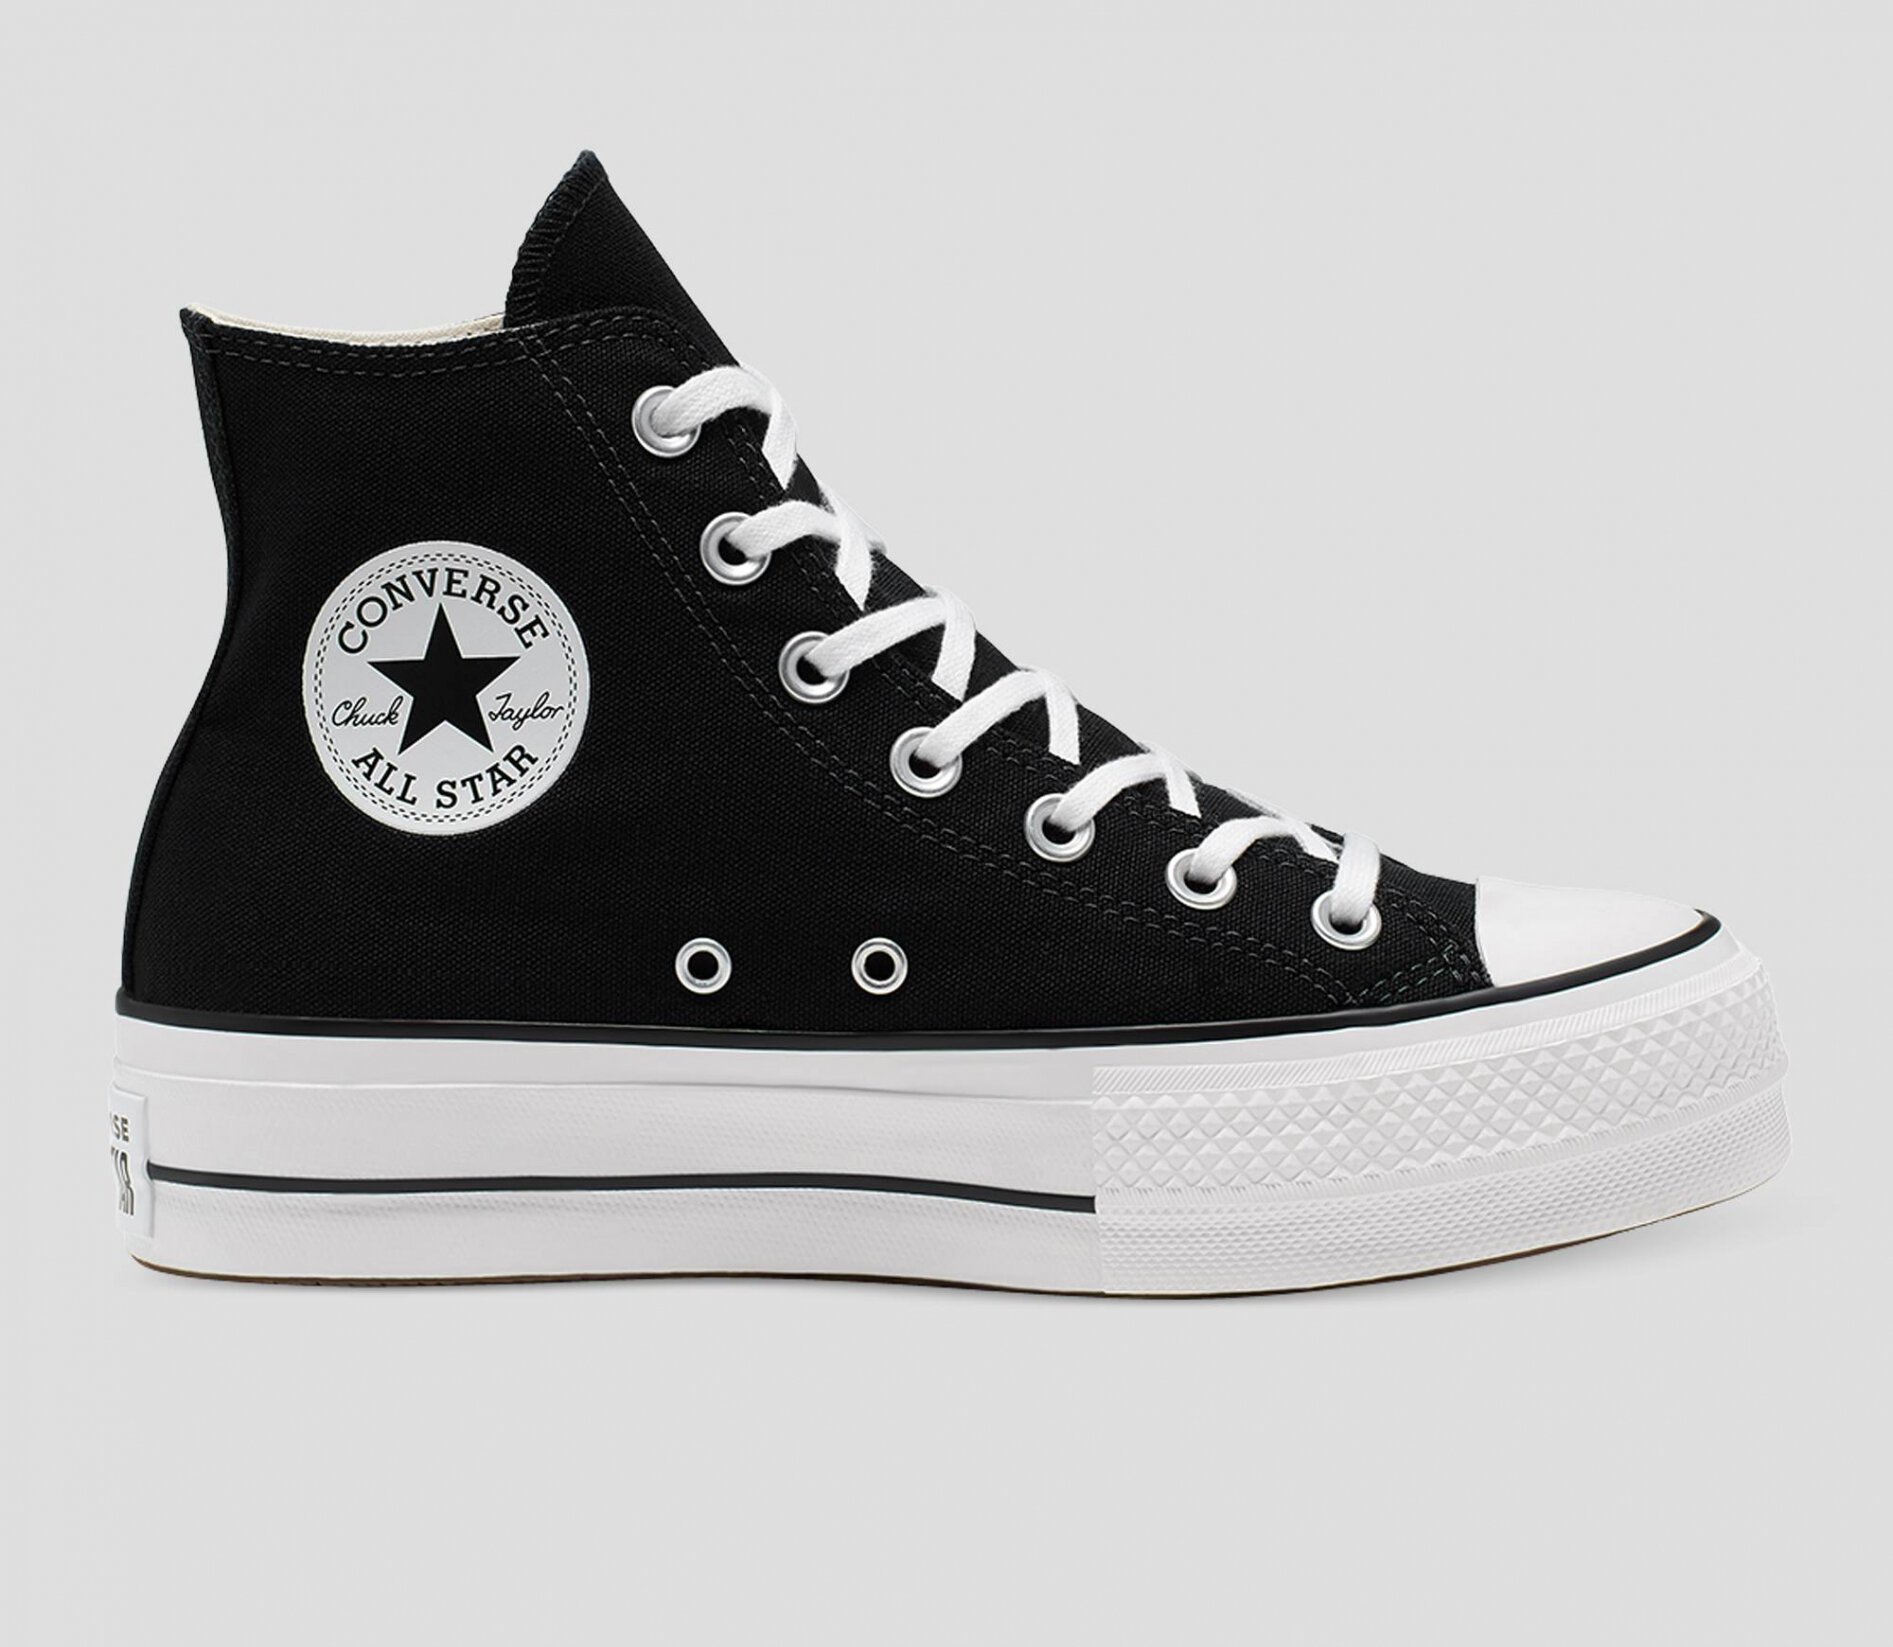 Converse Chuck Taylor All Star Canvas Lift High Top Womens - Buy Online -  Ph: 1800-370-766 - AfterPay & ZipPay Available!